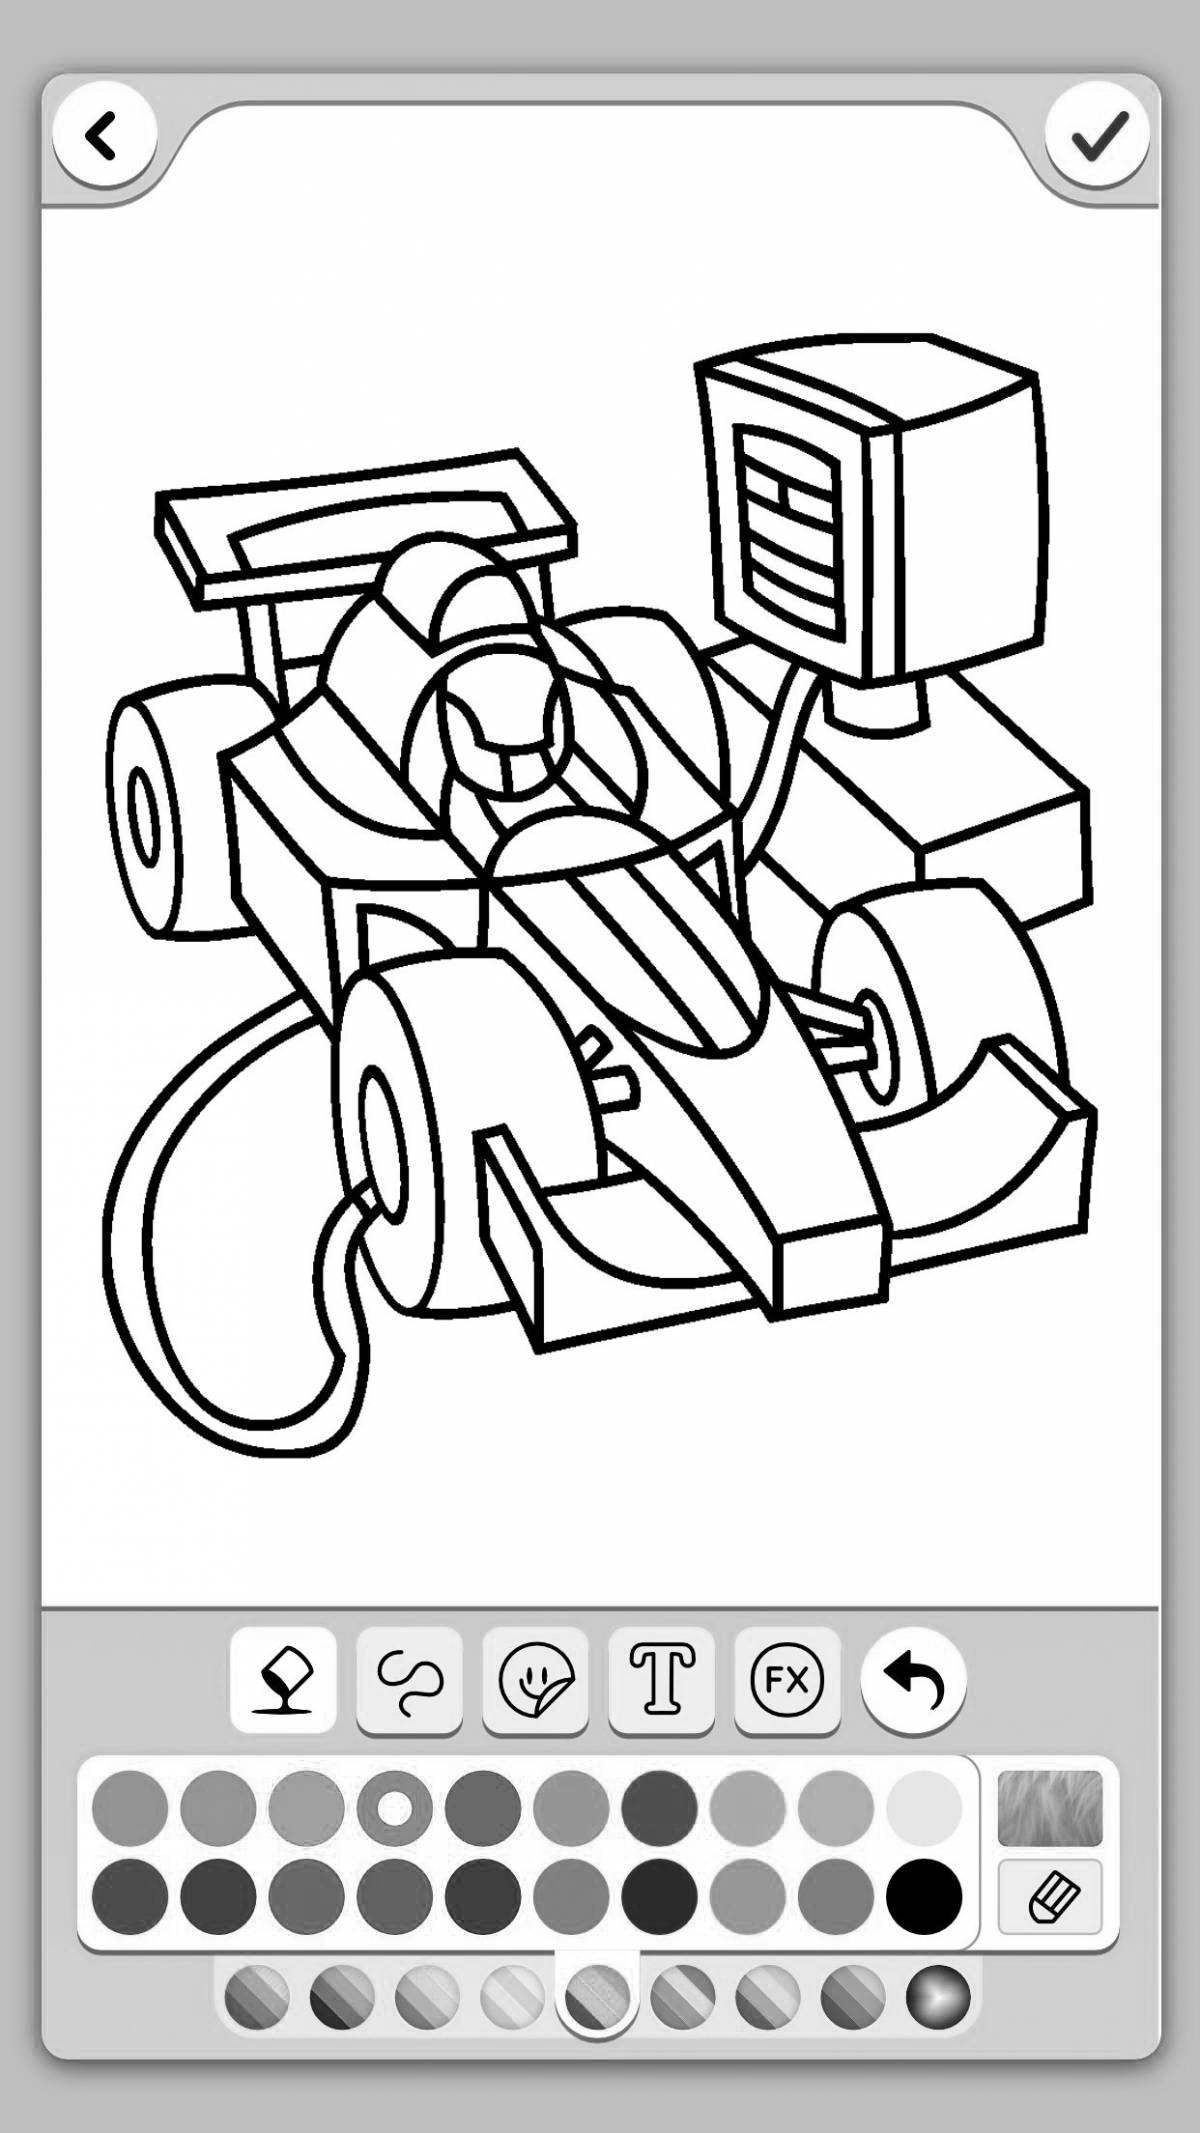 Exciting coloring book apk